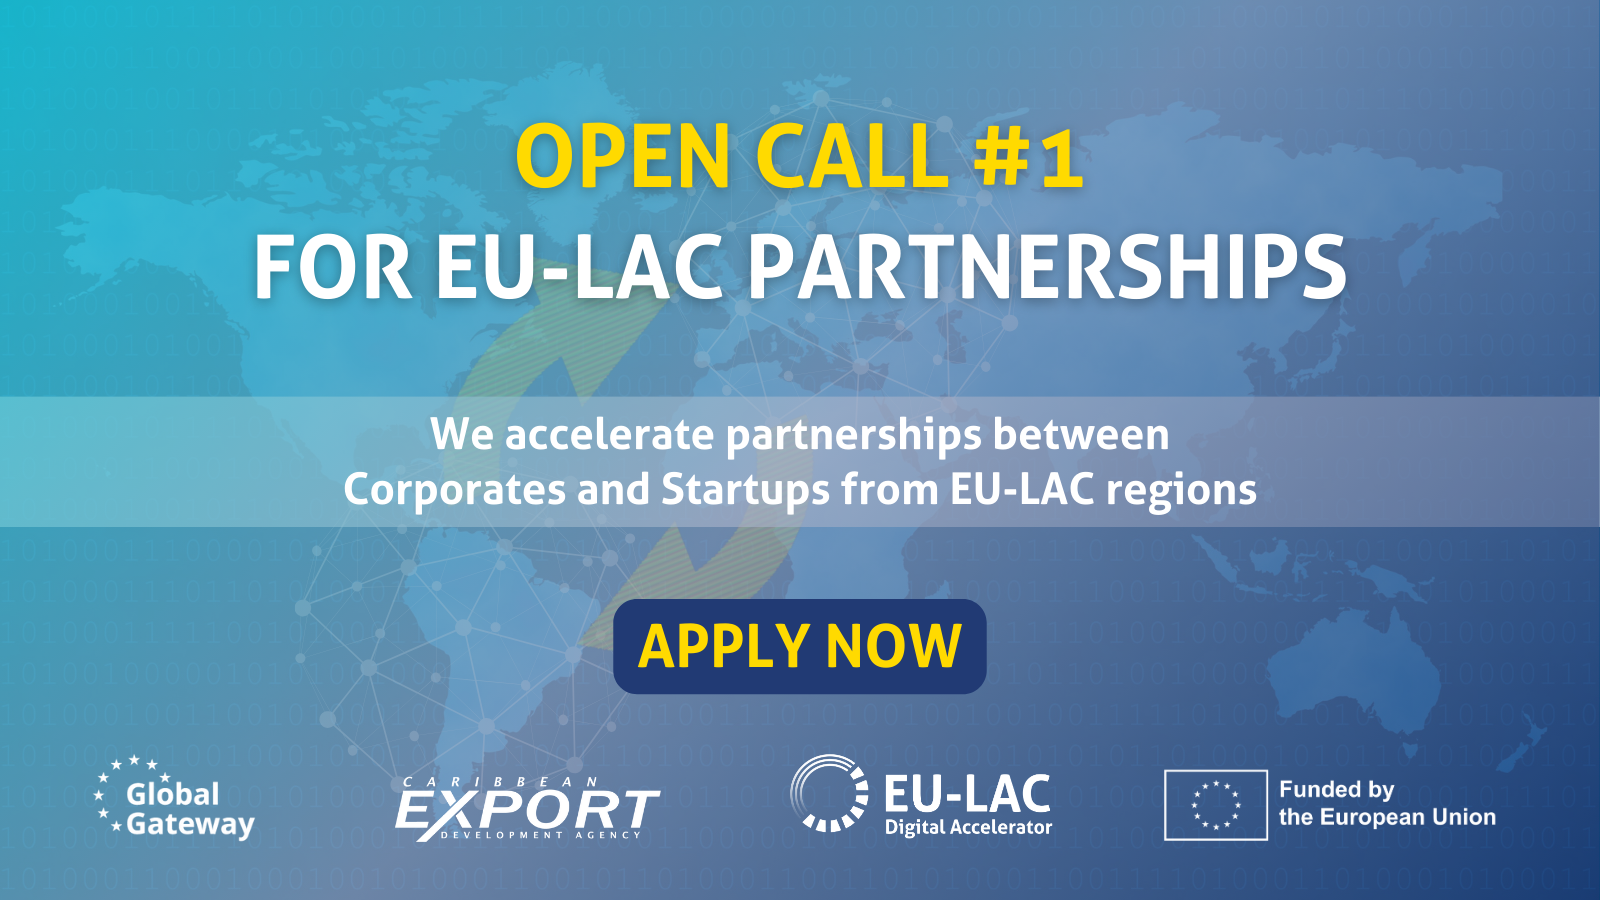 EU-LAC Digital Accelerator launches its first open call for European, Latin American and Caribbean business partnerships